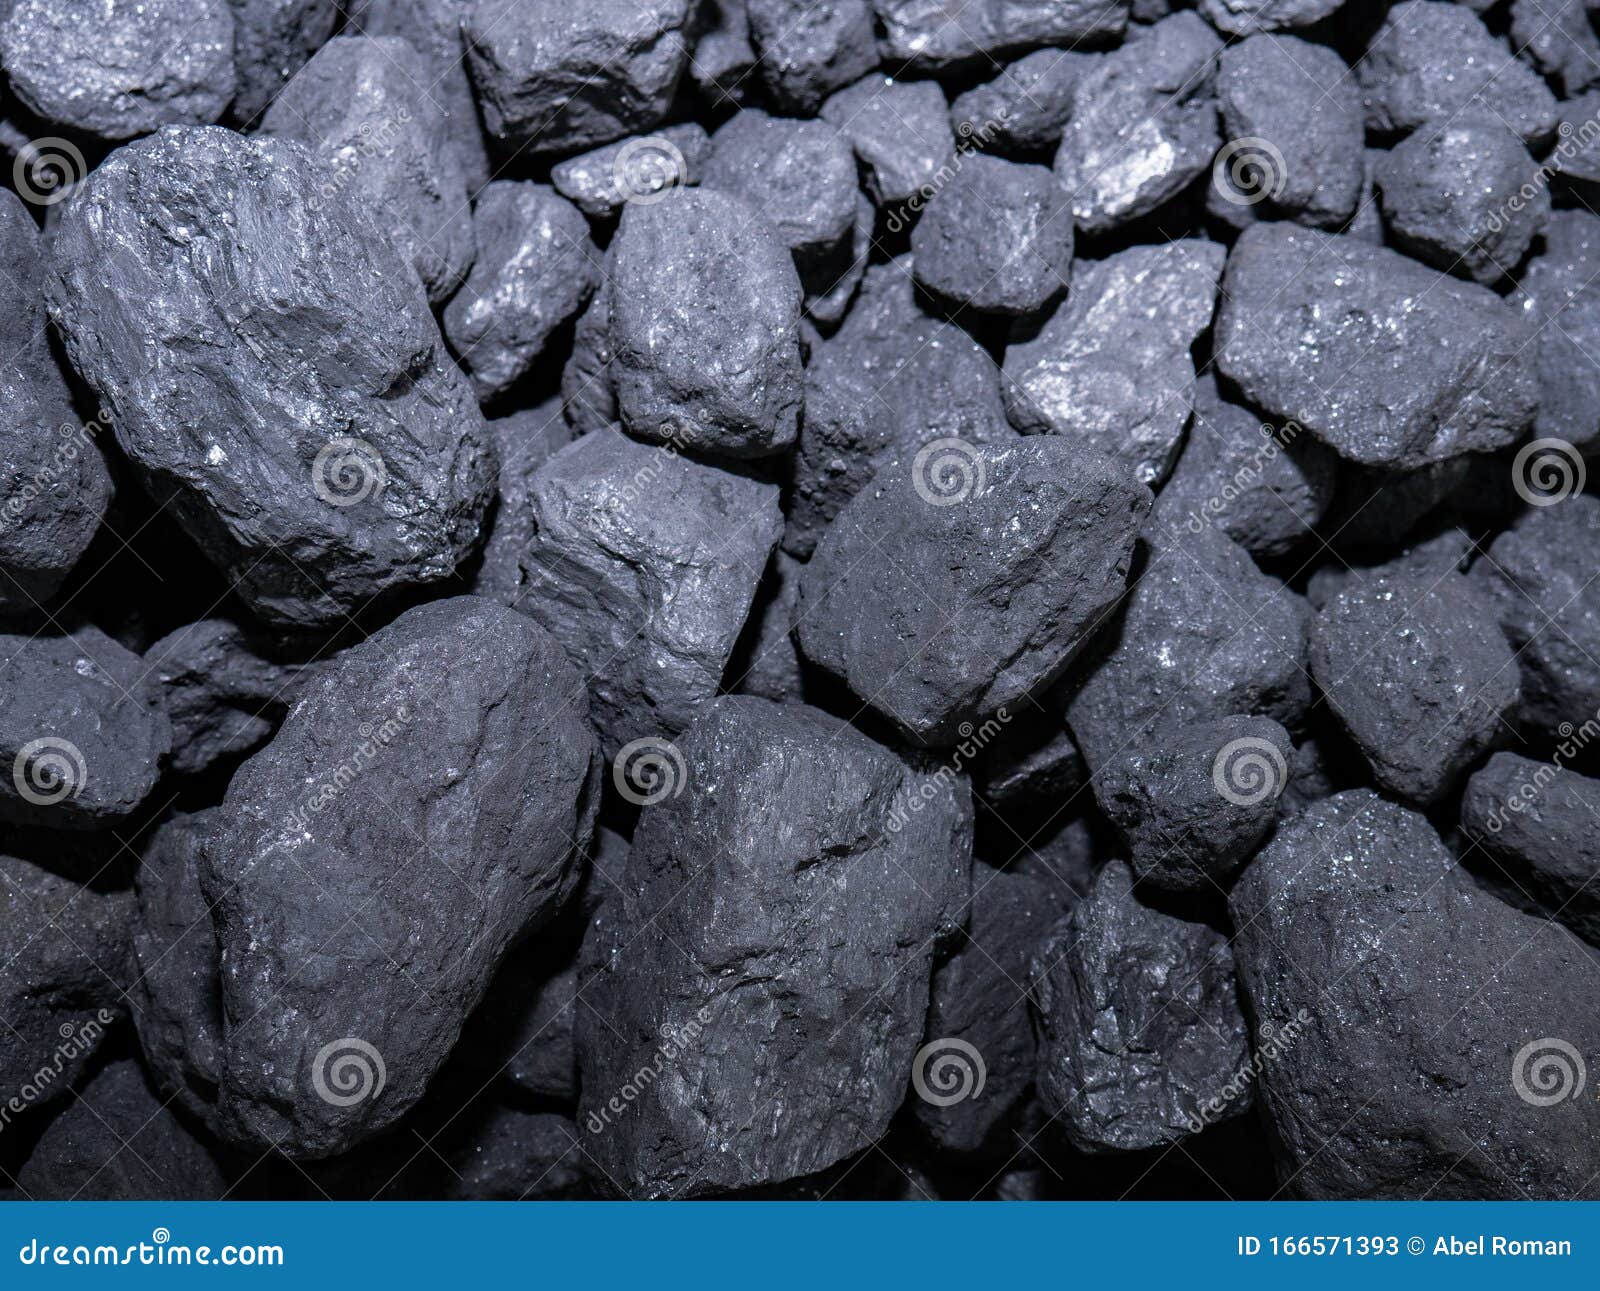 macro view of carbon stones forming a nice background